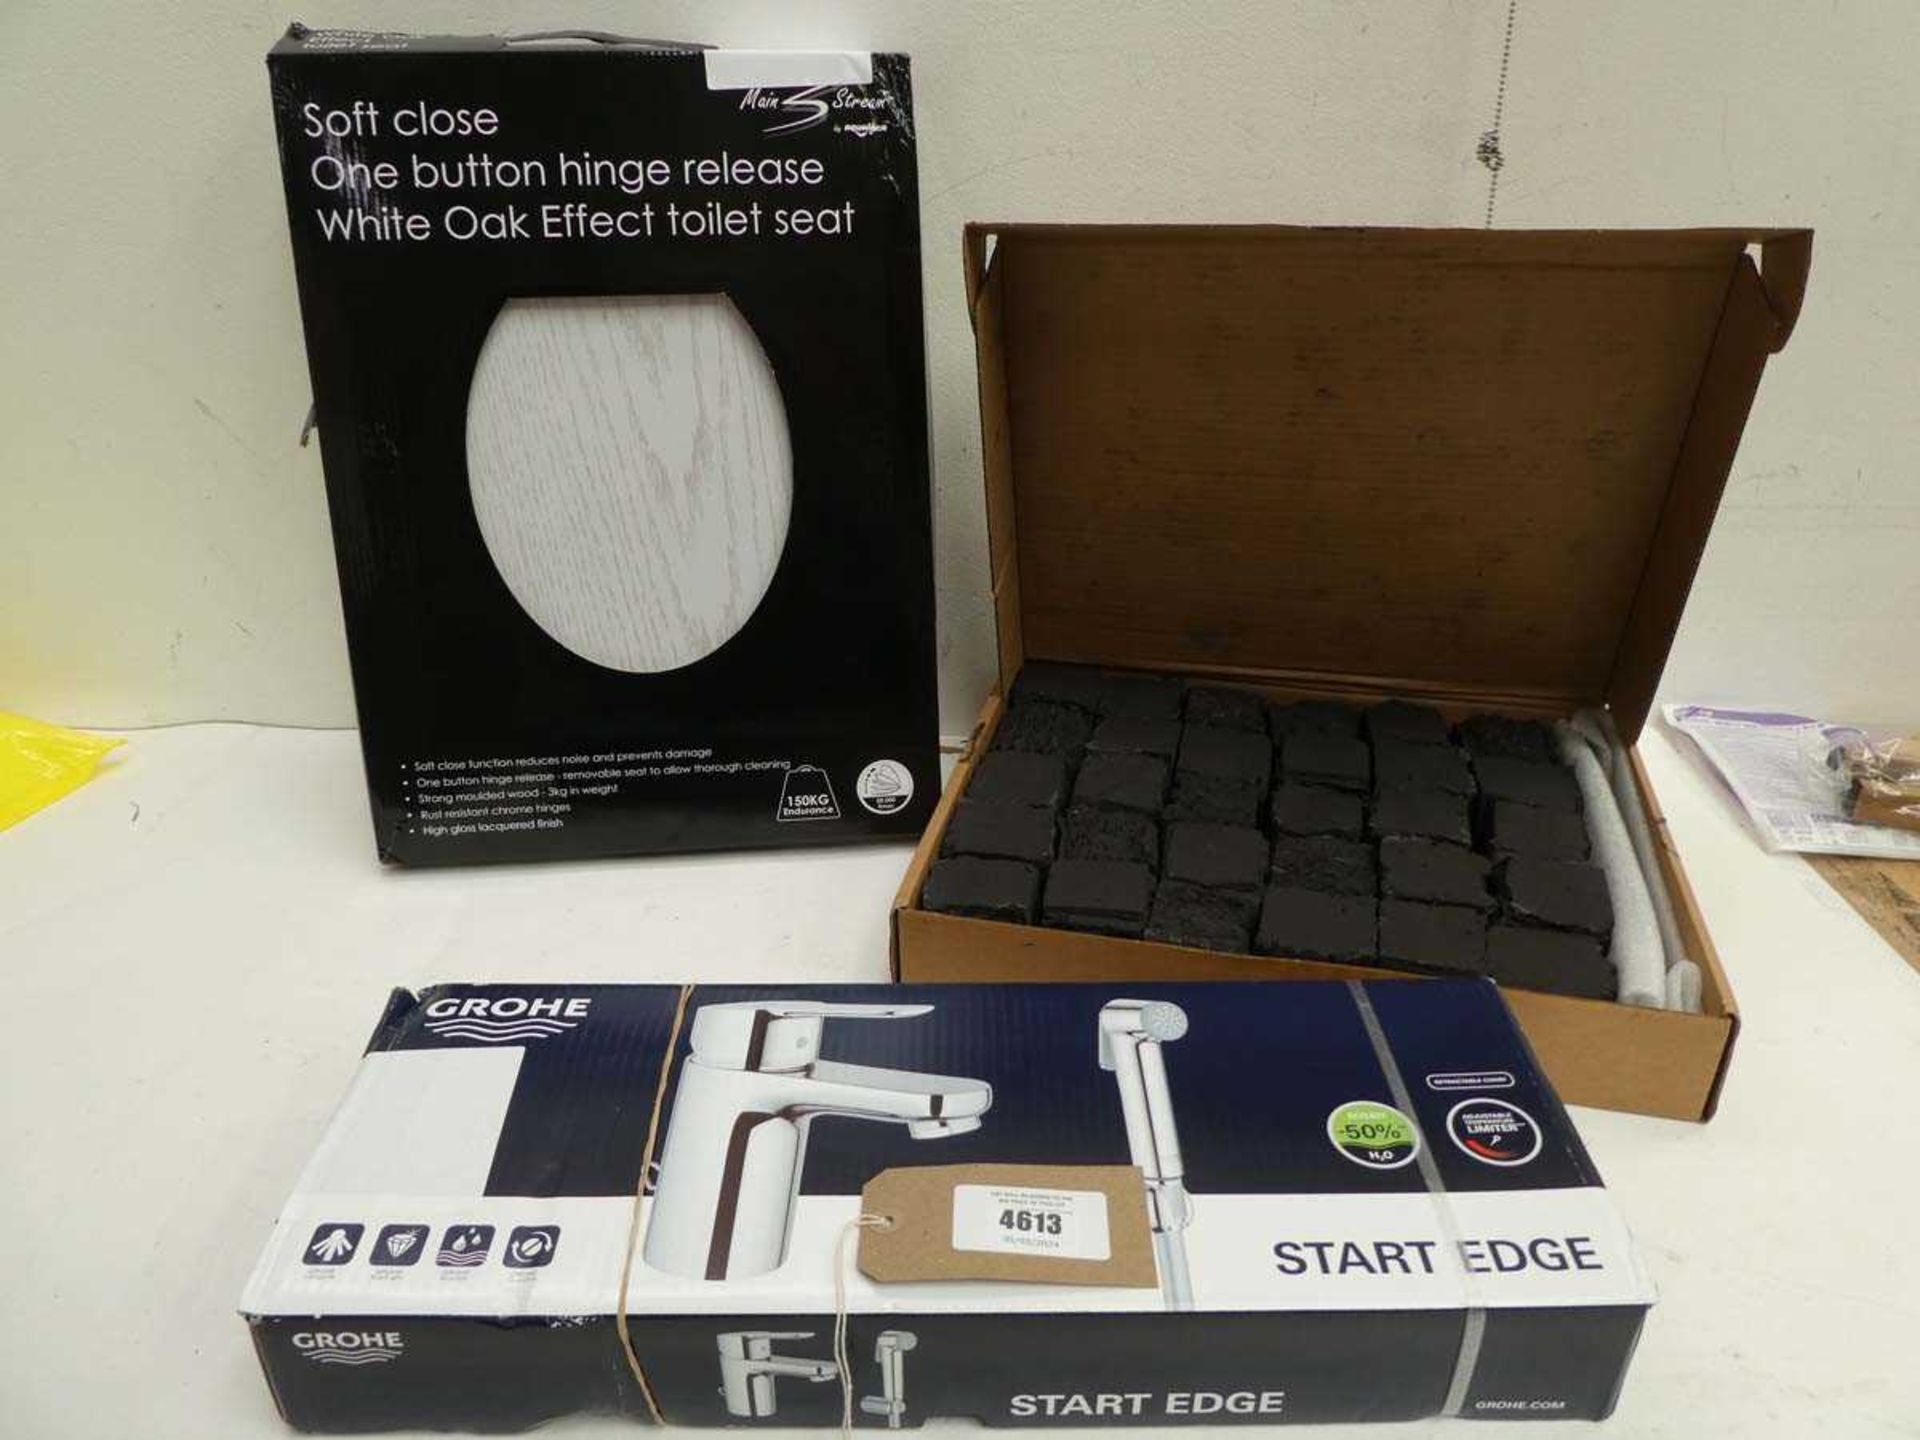 +VAT Soft Close white oak effect toilet seat, Grohe Start Edge mixer tap and box of gas fire